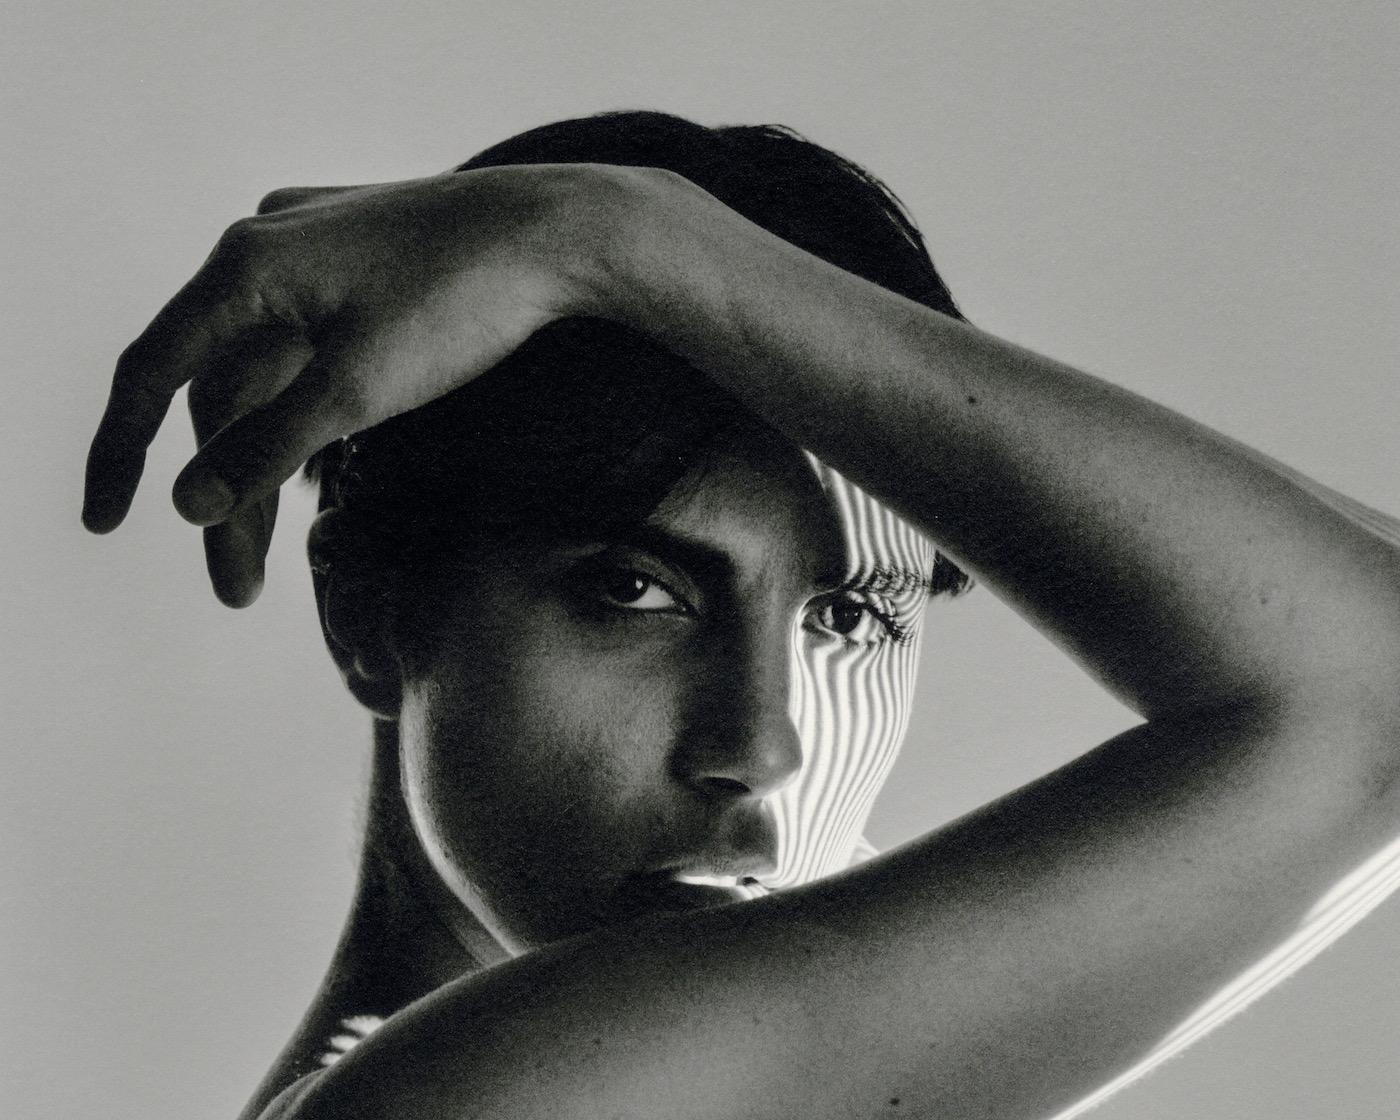 Roarie XVII (Nude in Shadows looking through arm) - Photograph by Laurence Winram